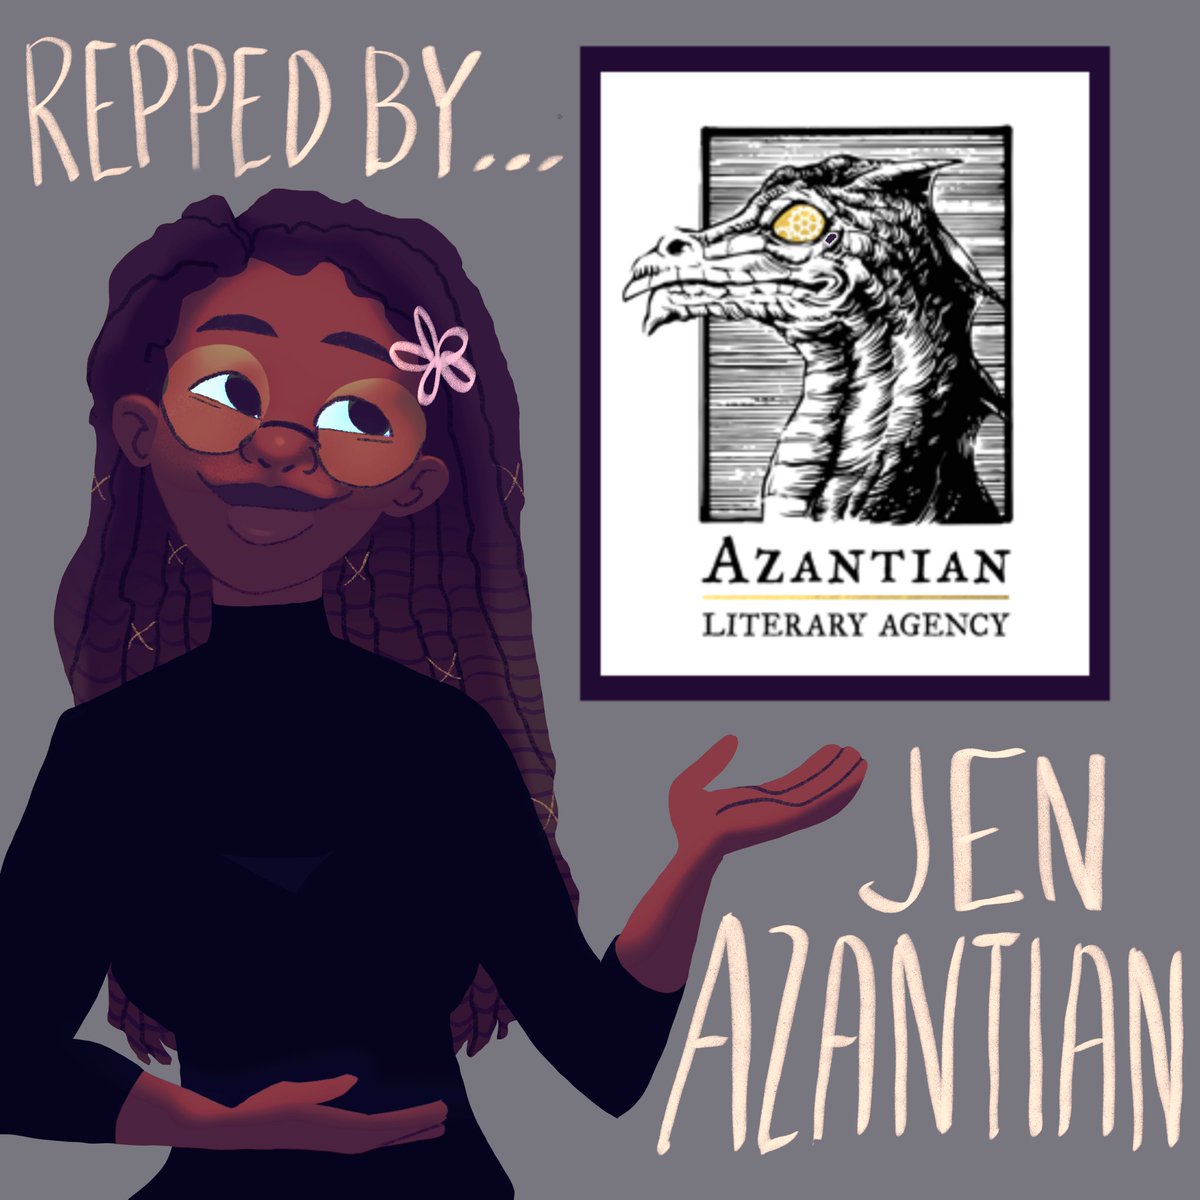 Stoked to finally to announce that I'm now officially repped by @jenazantian! Very excited to work with her to bring projects about my heritage and interests to life! 